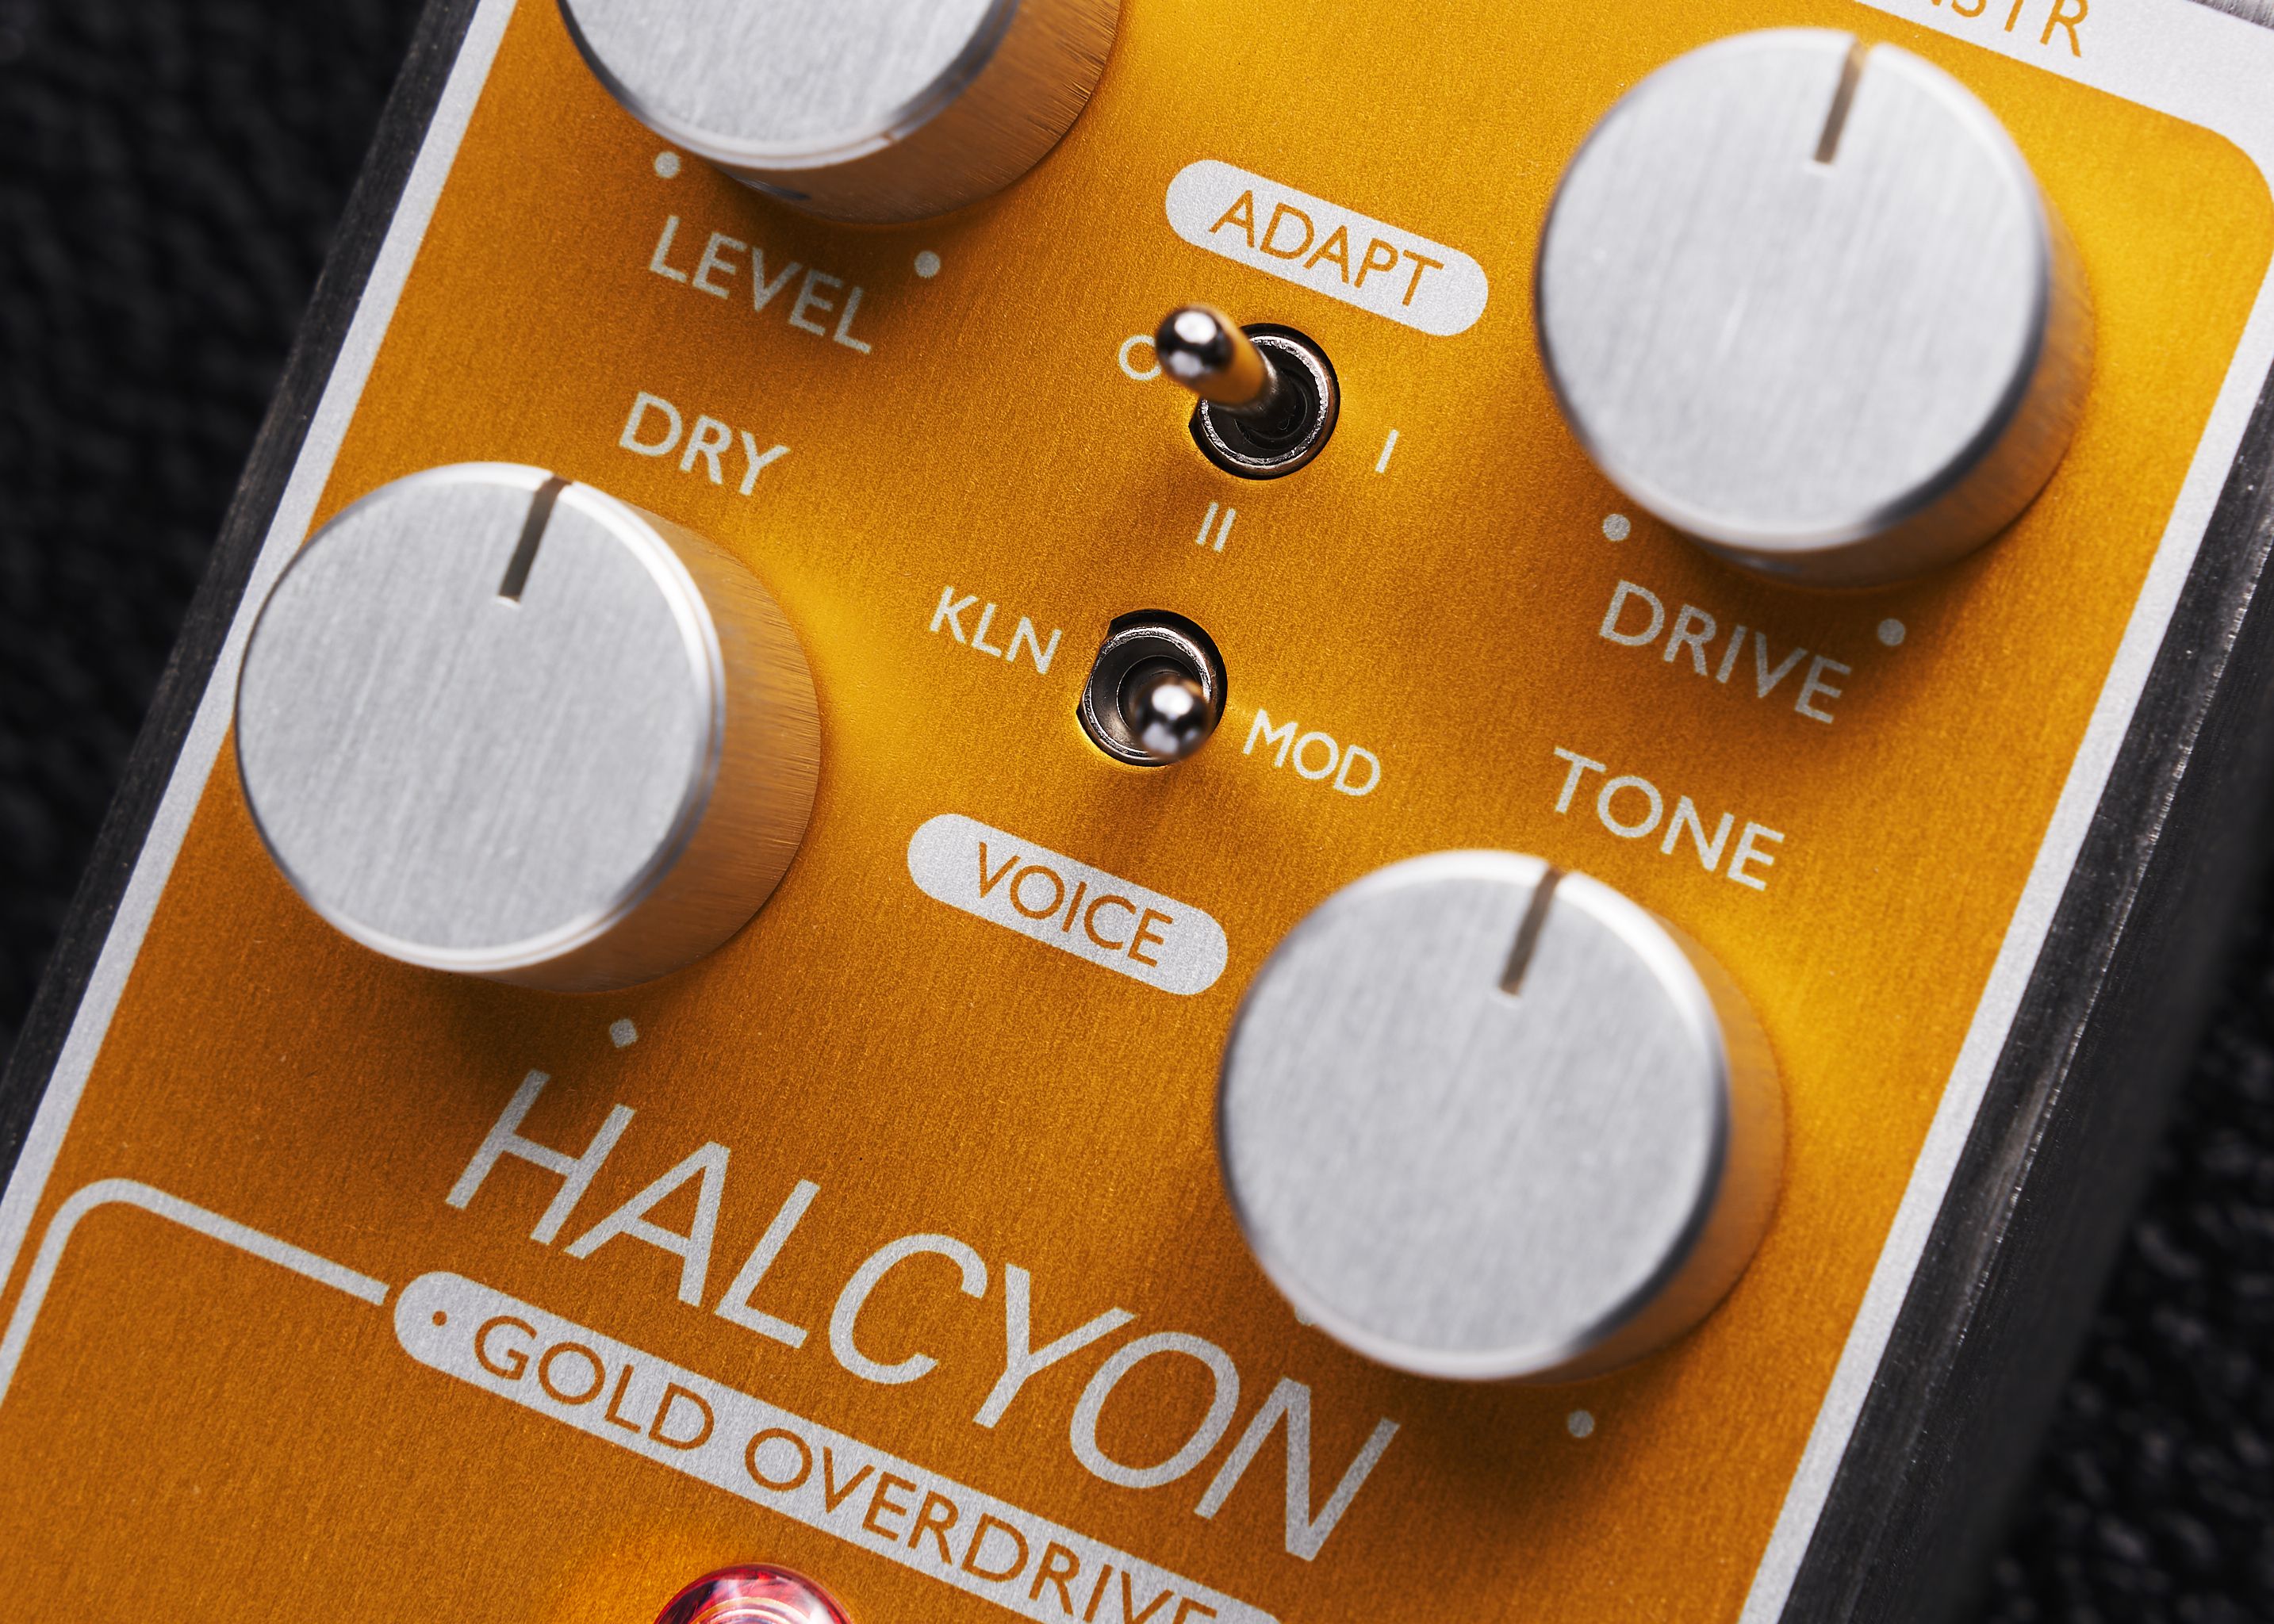 Origin Effects Halcyon Gold Overdrive - Overdrive, distortion & fuzz effect pedal - Variation 4